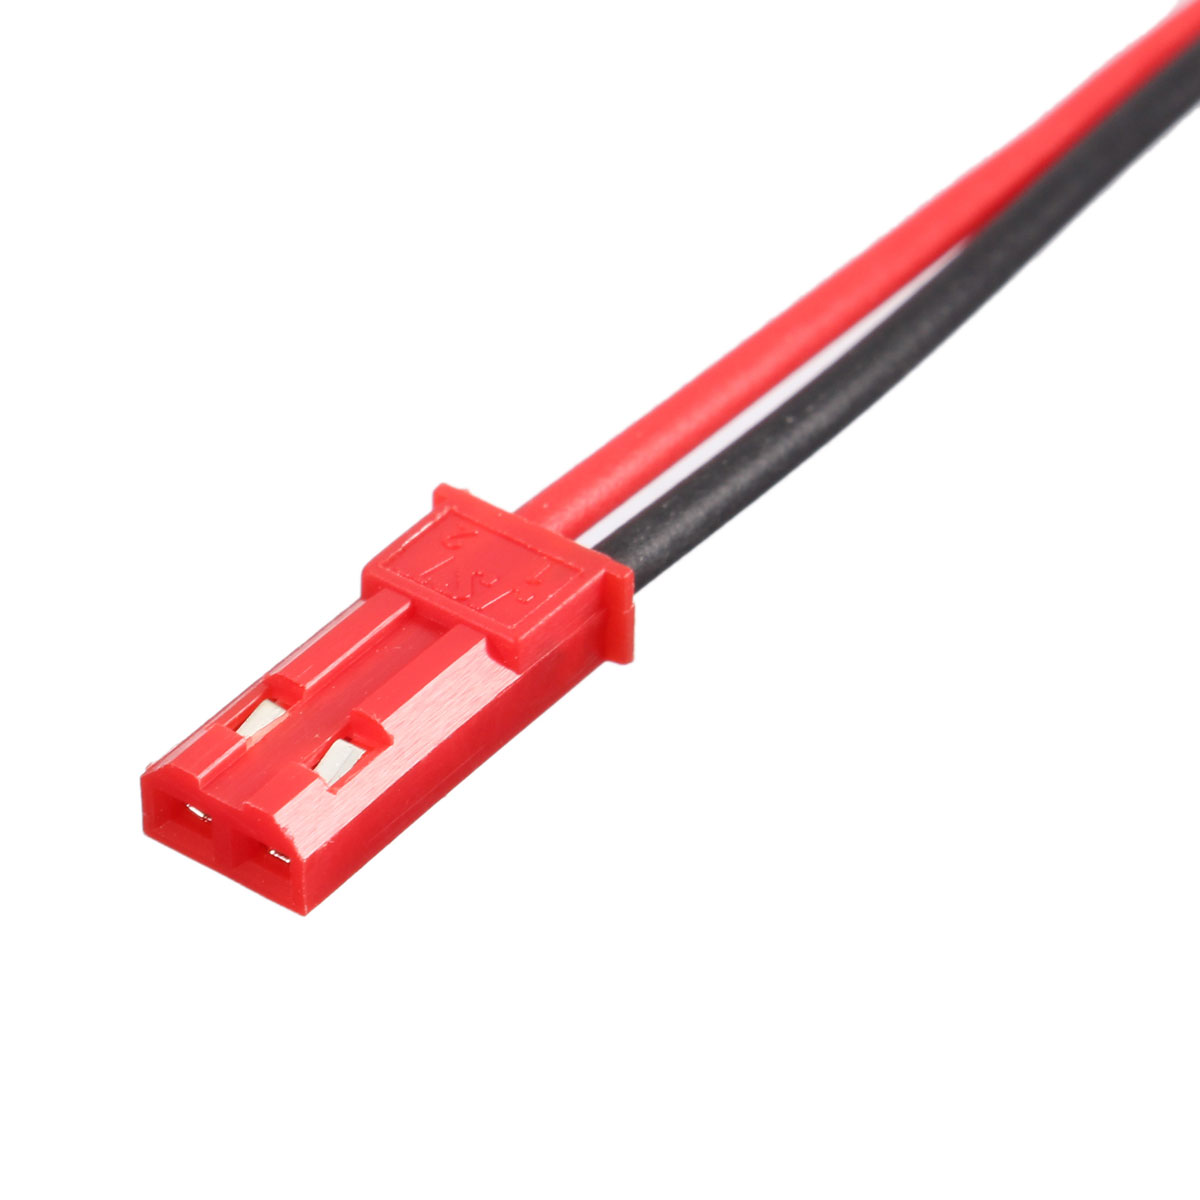 Excellwayreg-10-Pairs-2-Pins-JST-Male--Female-Connectors-Plug-Cable-Wire-Line-110mm-Red-1268119-5